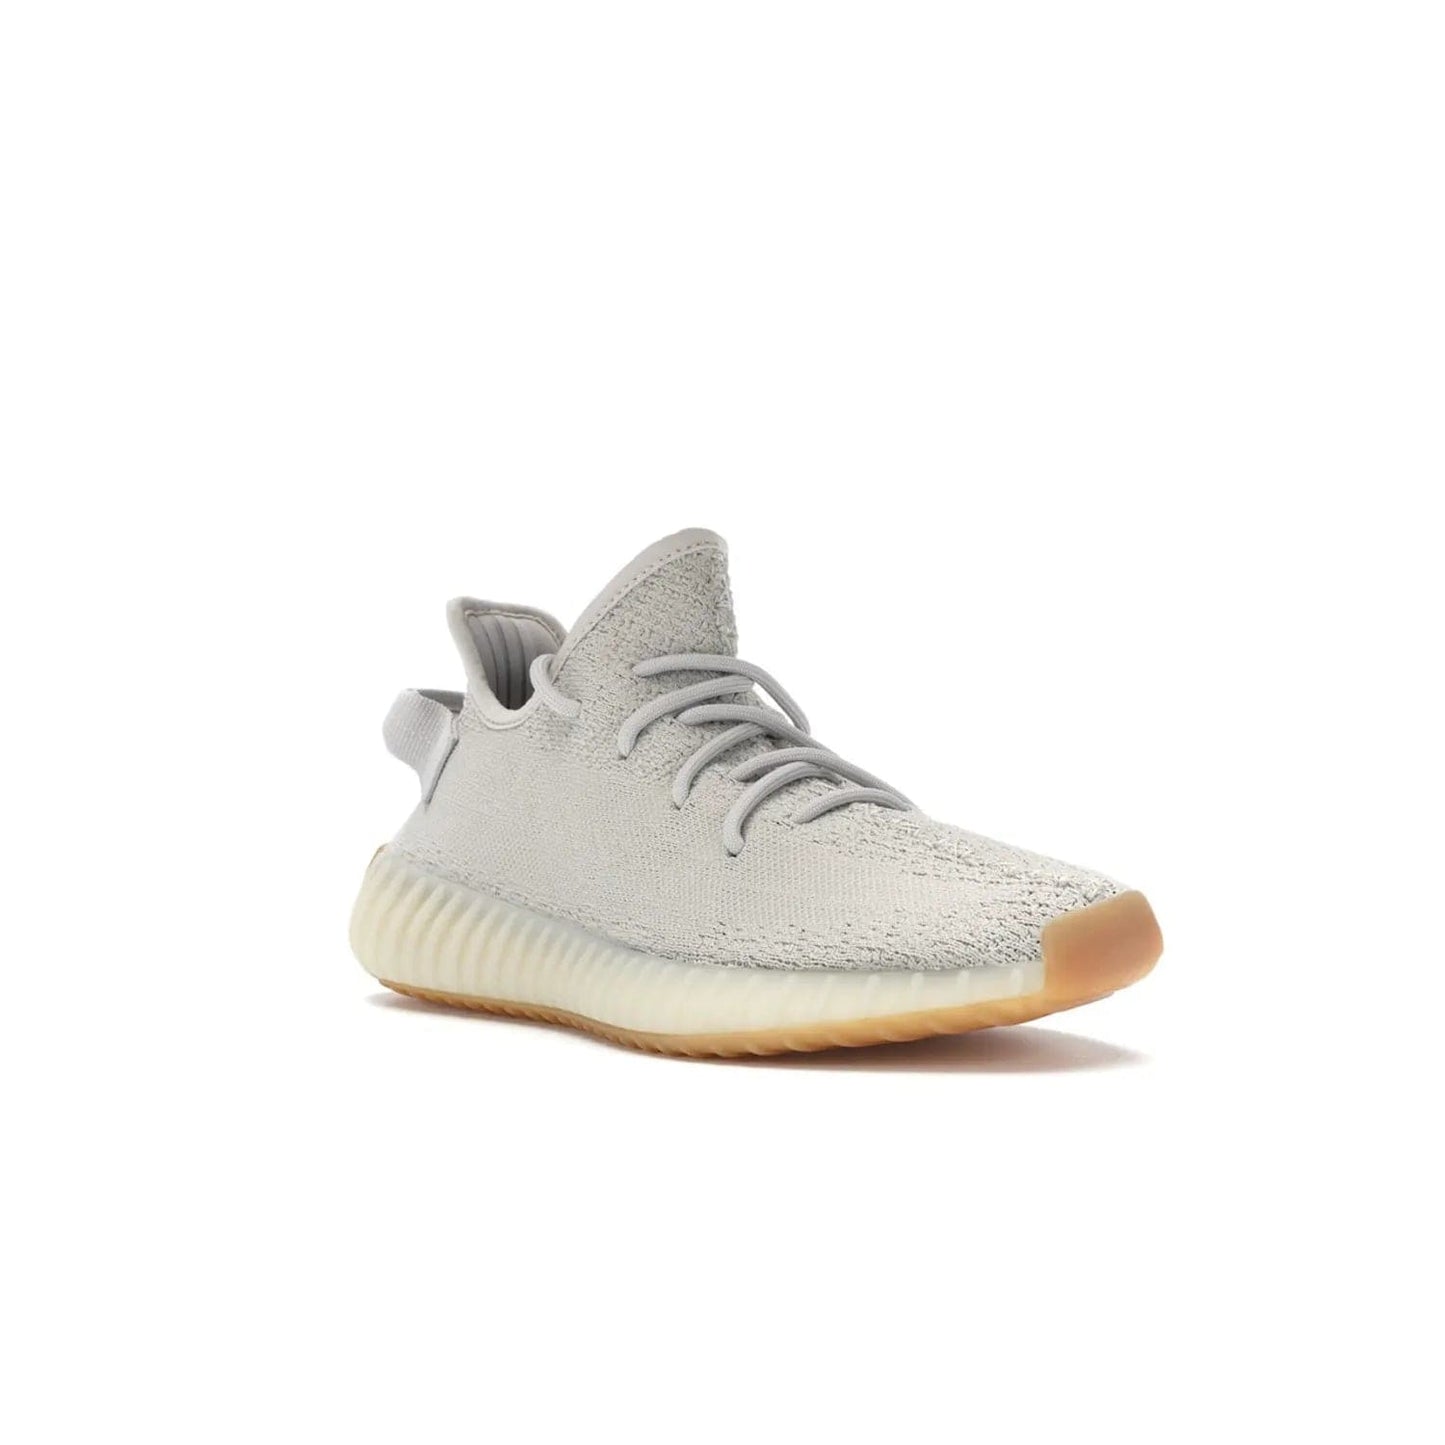 adidas Yeezy Boost 350 V2 Sesame - Image 6 - Only at www.BallersClubKickz.com - Introducing the adidas Yeezy Boost 350 V2 Sesame. Featuring a sesame upper, midsole and gum sole for a sleek silhouette. Cop the stylish sneaker released in November 2018.